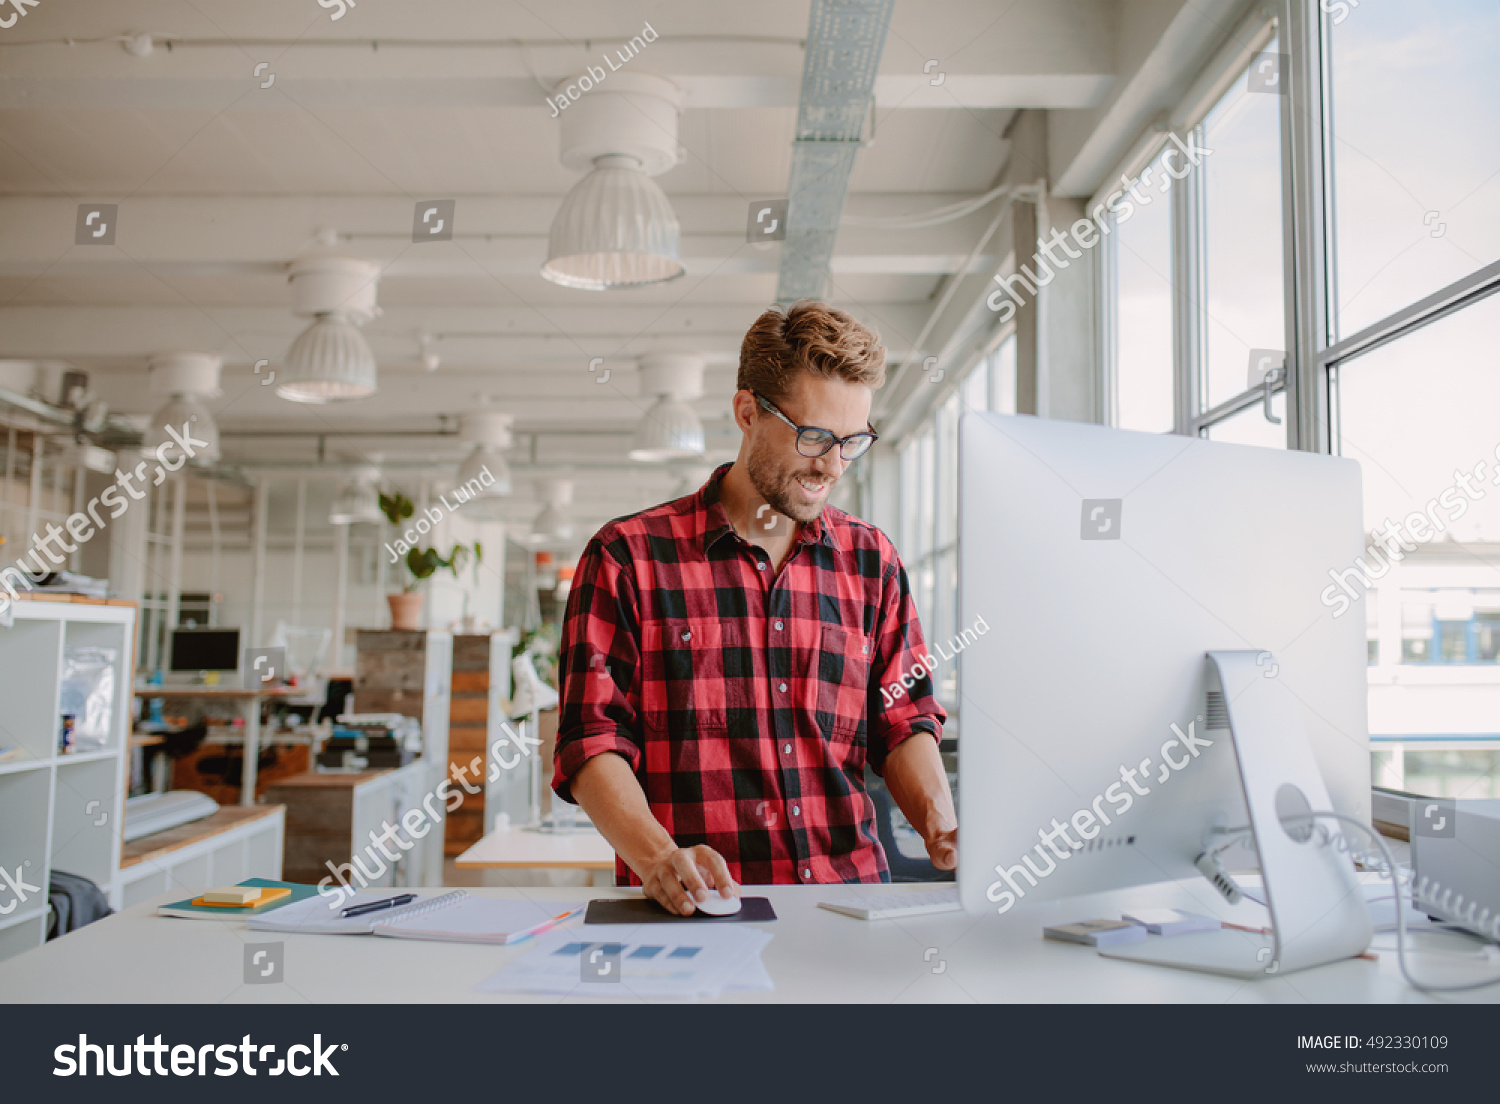 Shot of happy young man working on desktop computer in modern workplace. Young entrepreneur working at start up. #492330109